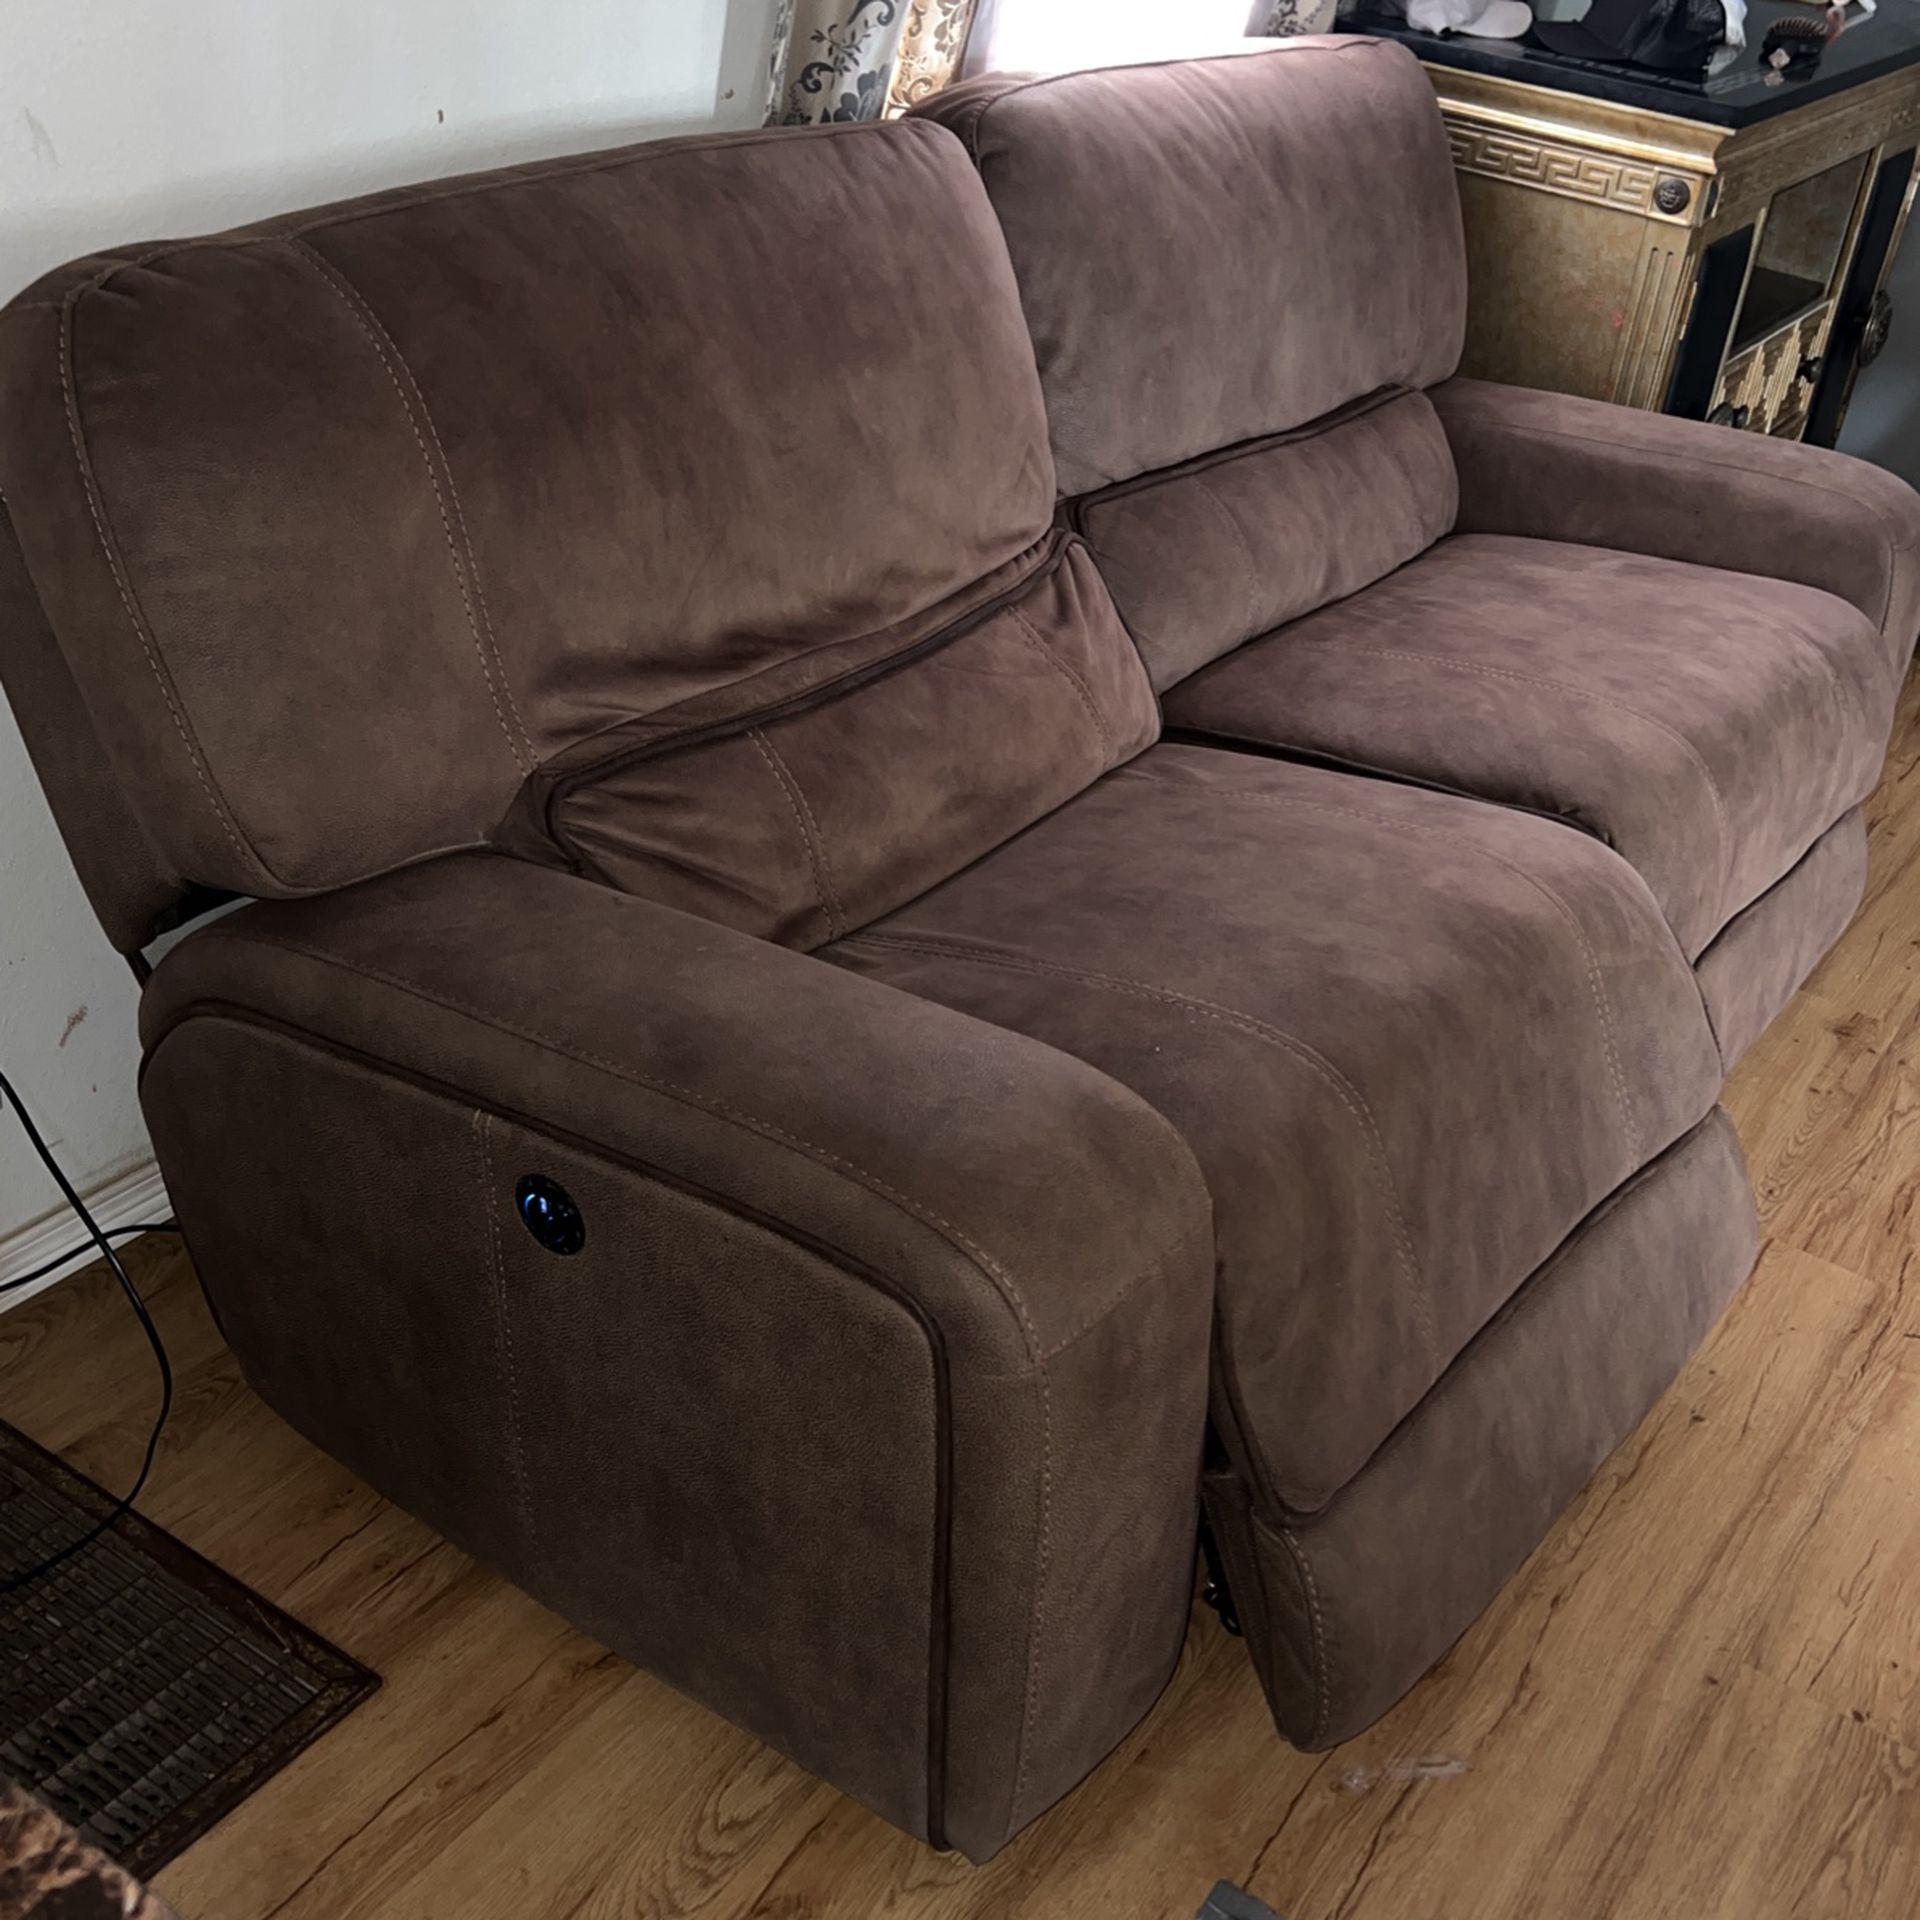 Electric Sofa With USB ( Offers)